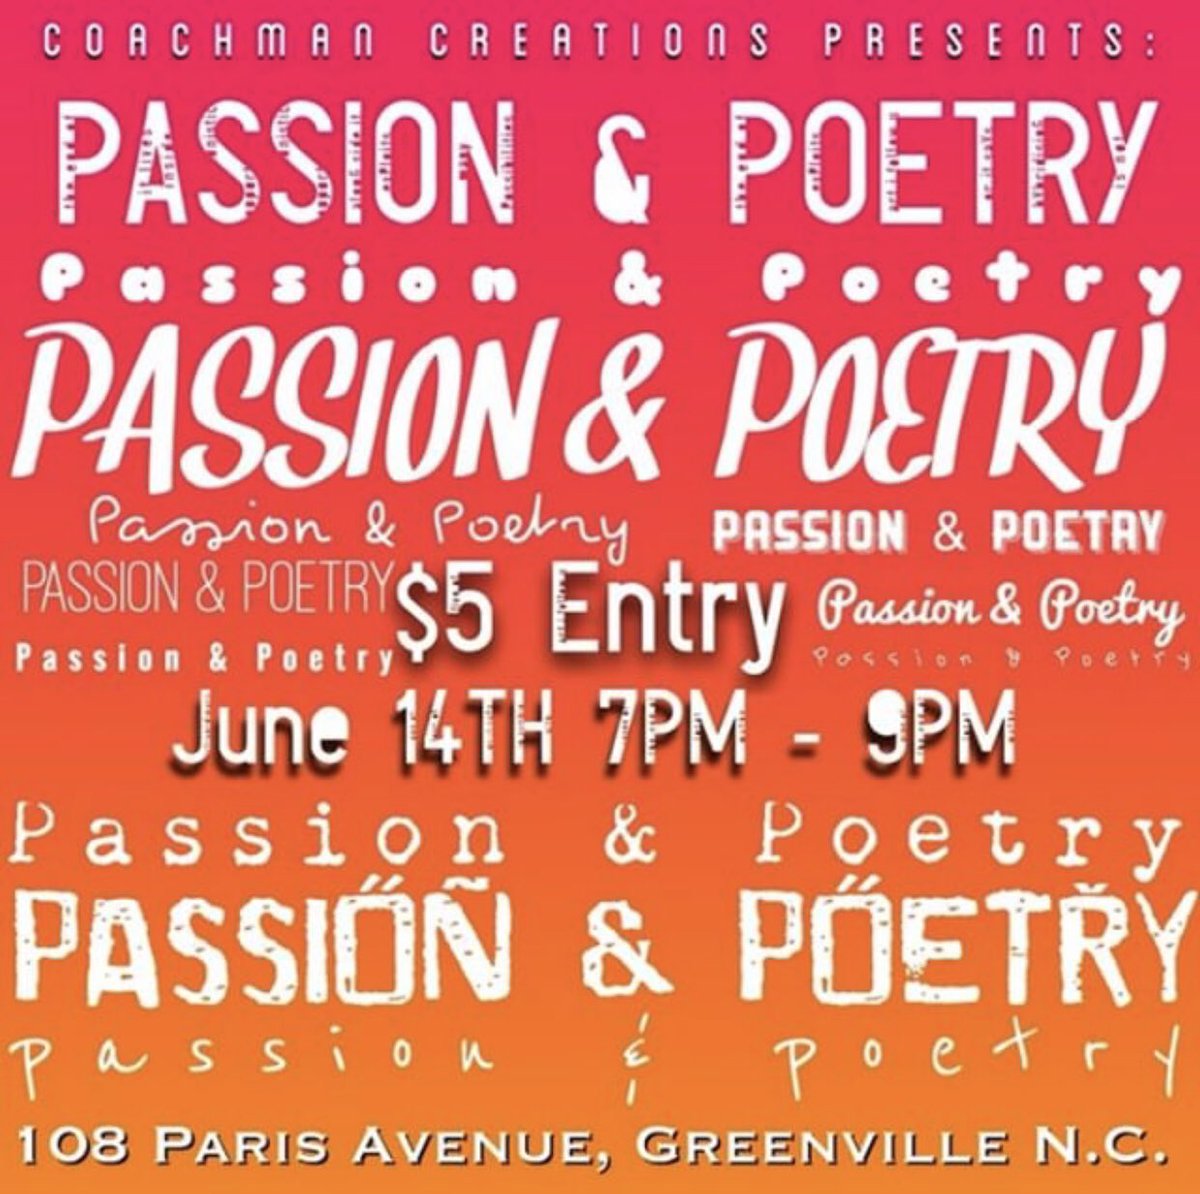 Coachman Creations Presents:

Passion & Poetry 🖤✍🏽

June 14th 7PM - 9PM ⏰
Greenville, NC 📍
$5 ENTRY 💲

Come join me and a few other amazing poets in celebration of passion. 

“Poetry is water for the soul.” 
#CoachmanCreations #PASSIONANDPOETRY